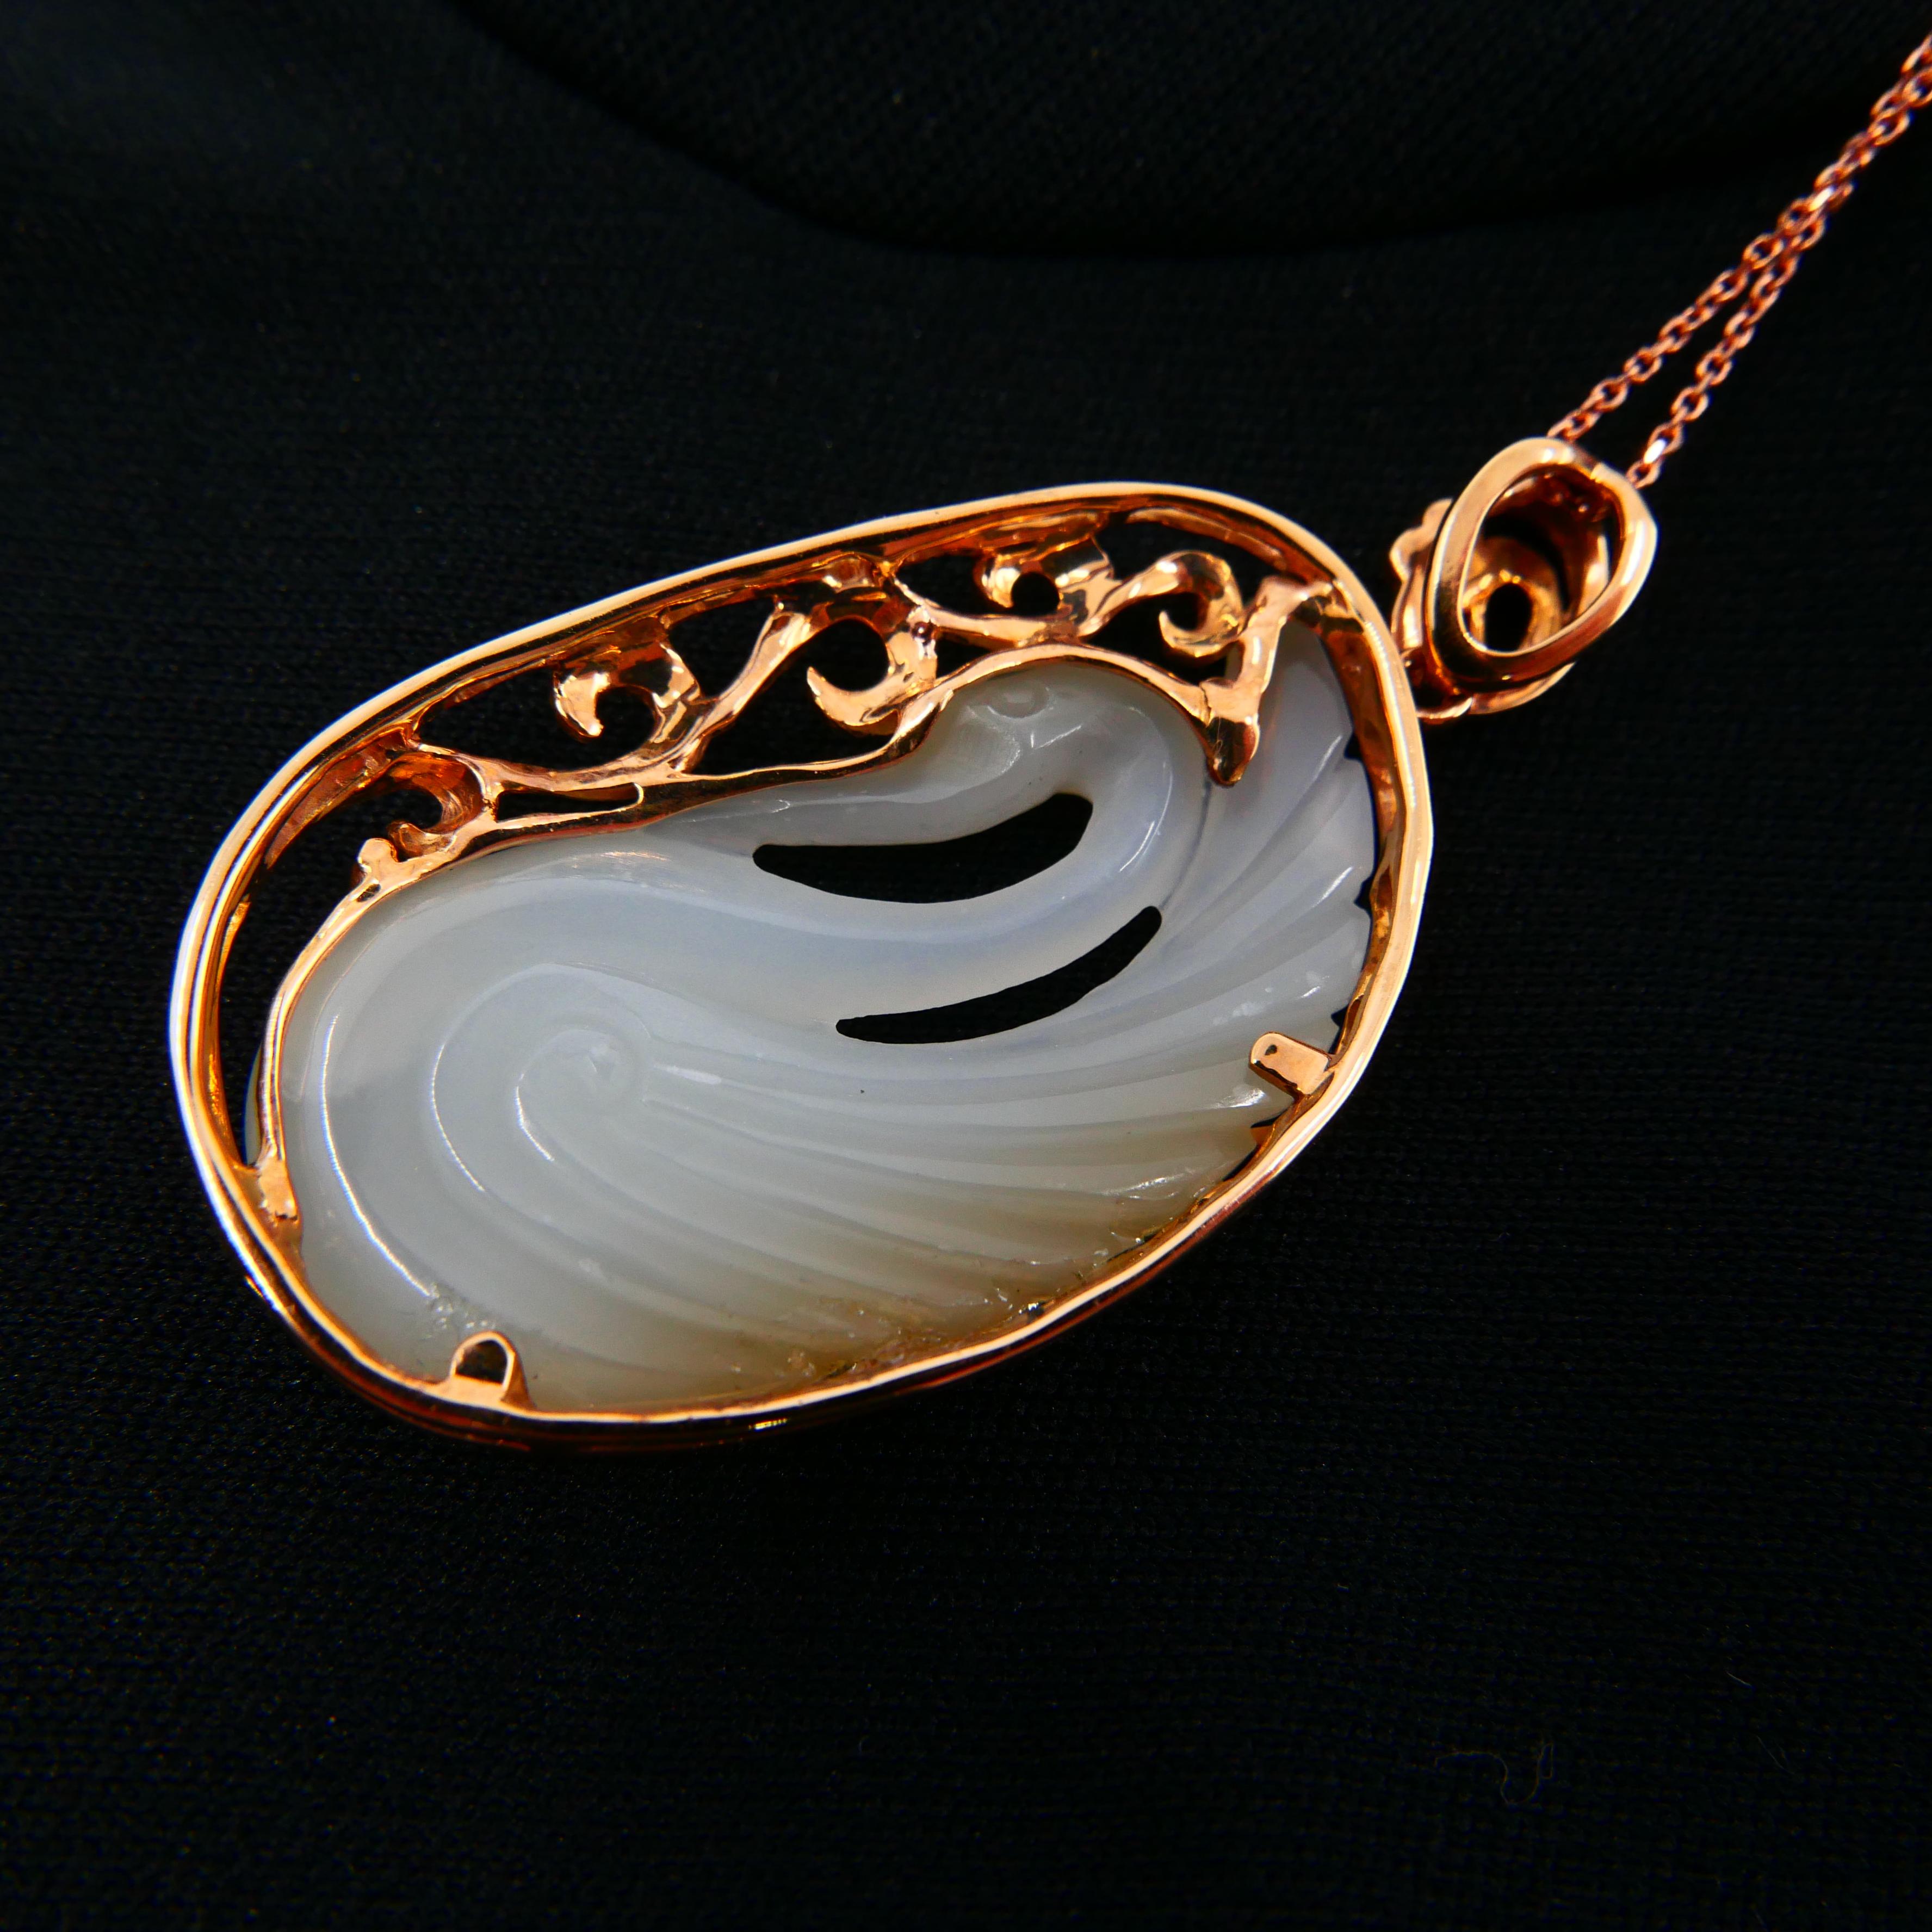 yigedan New Thousands of Golden Inlaid Natural Hetian White Jade Rose Pendant Necklace with Certificate 